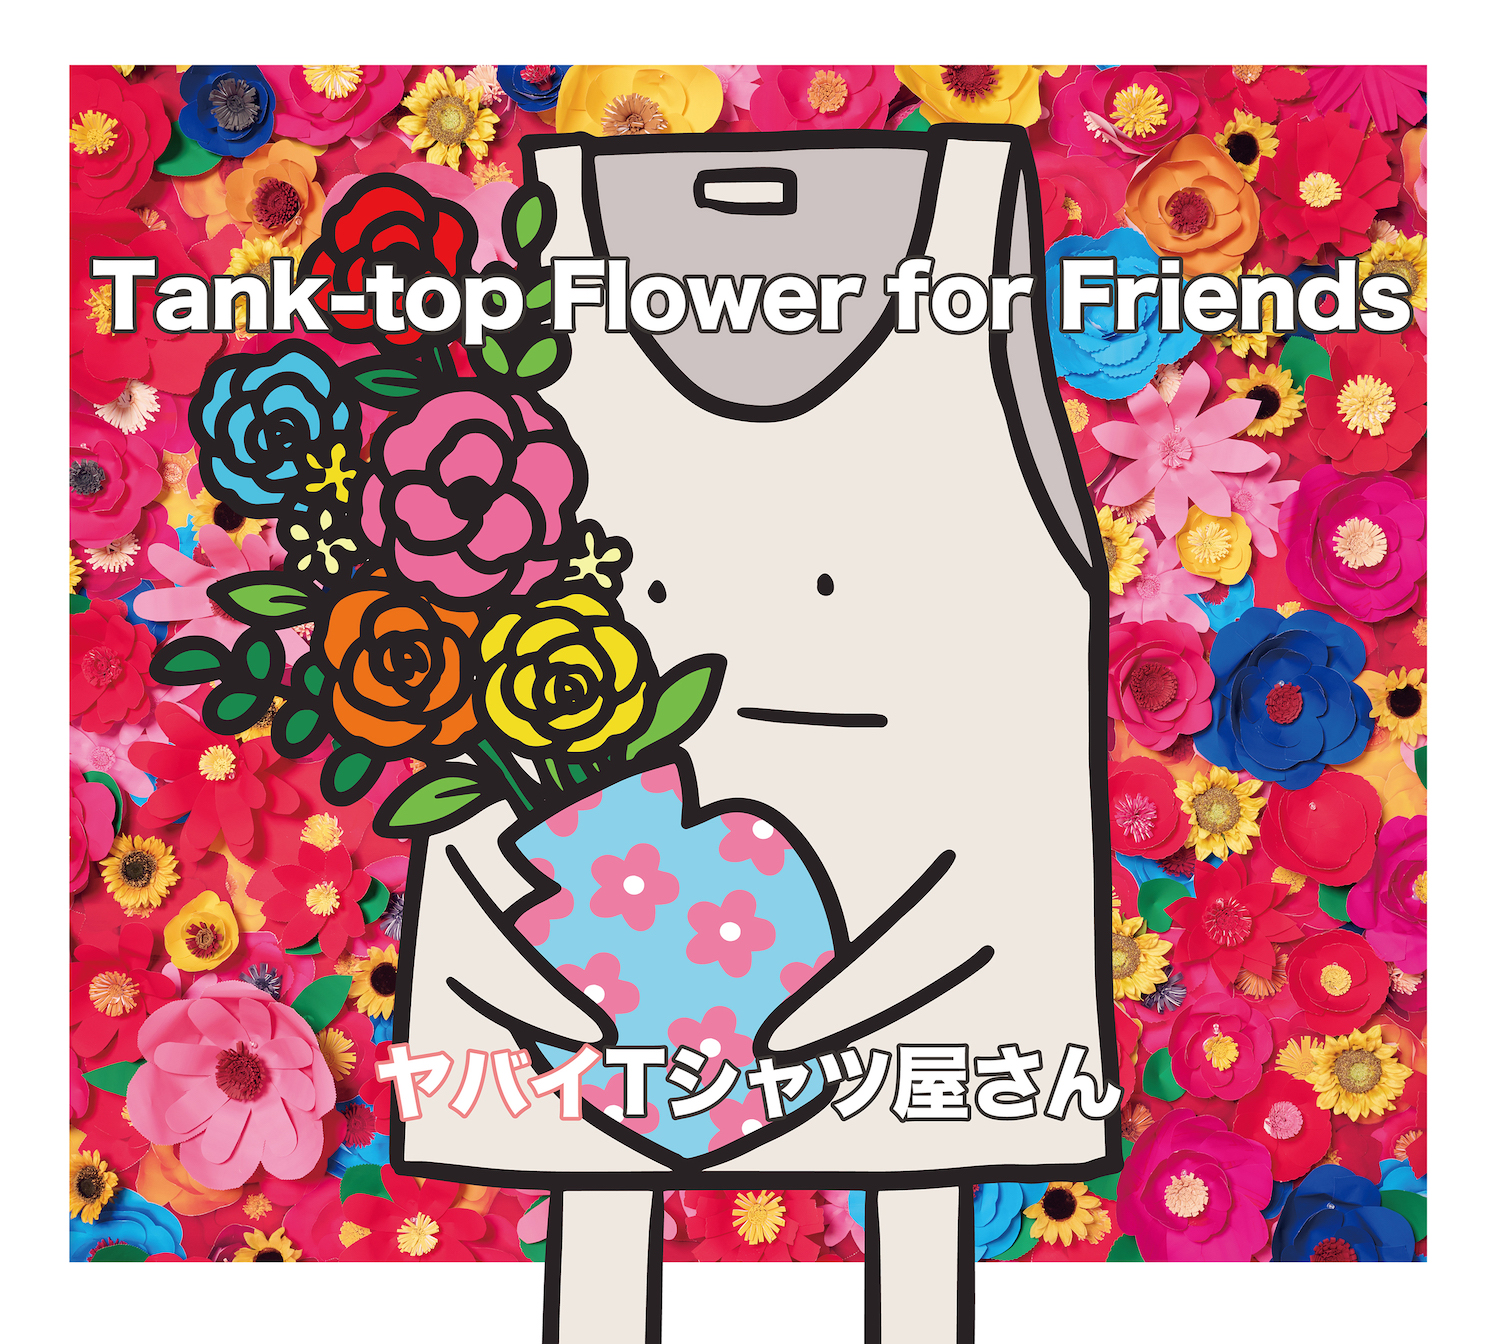 Tank-top Flower for Friends」完全生産限定盤 (CD+DVD+タンクトップ 